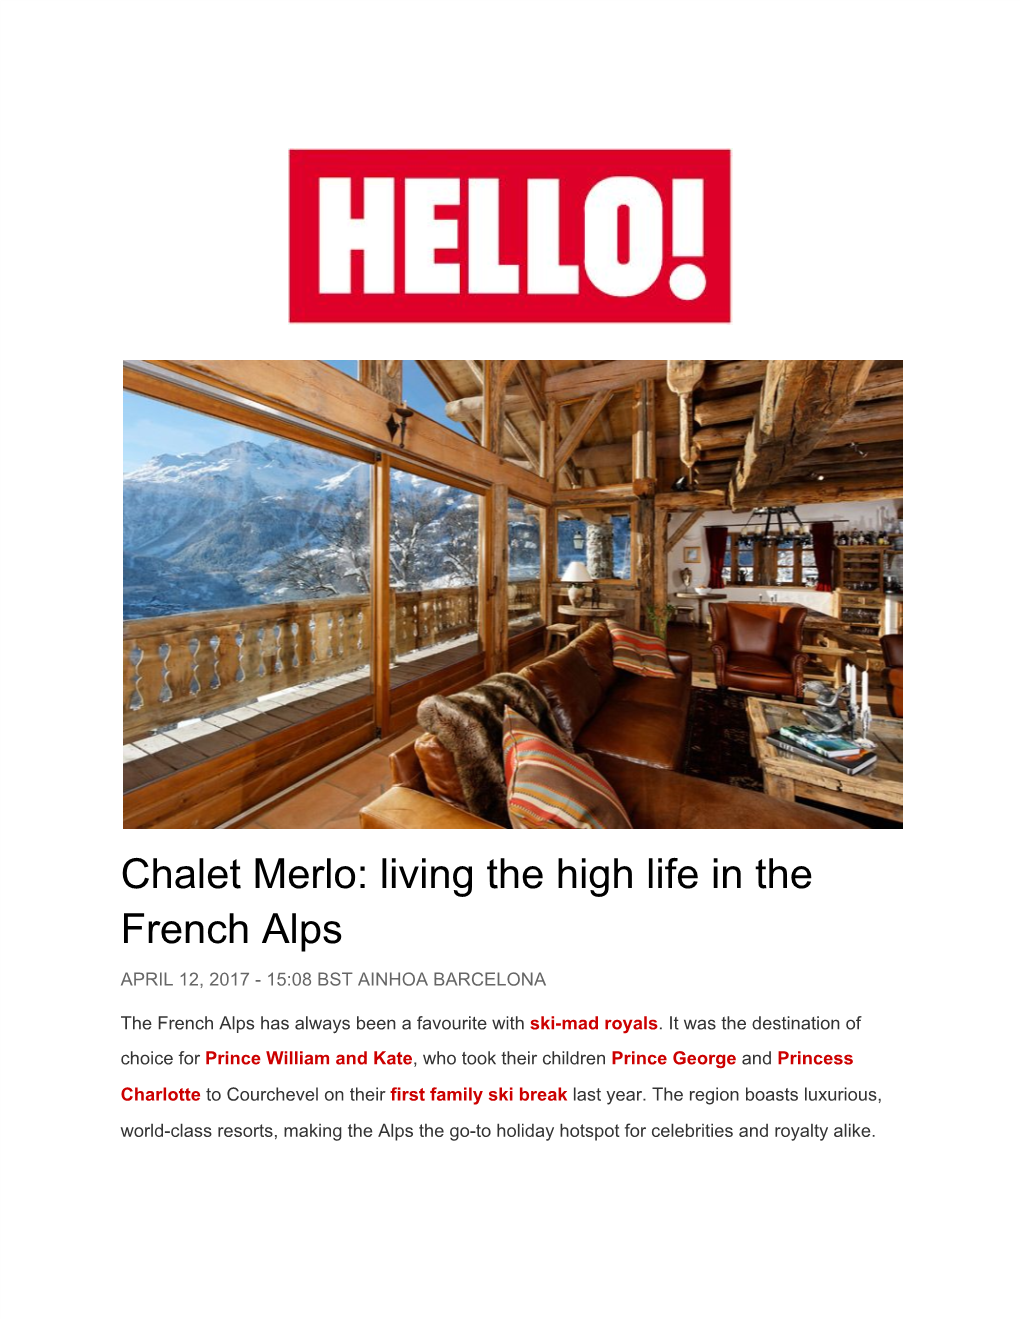 Chalet Merlo: Living the High Life in the French Alps